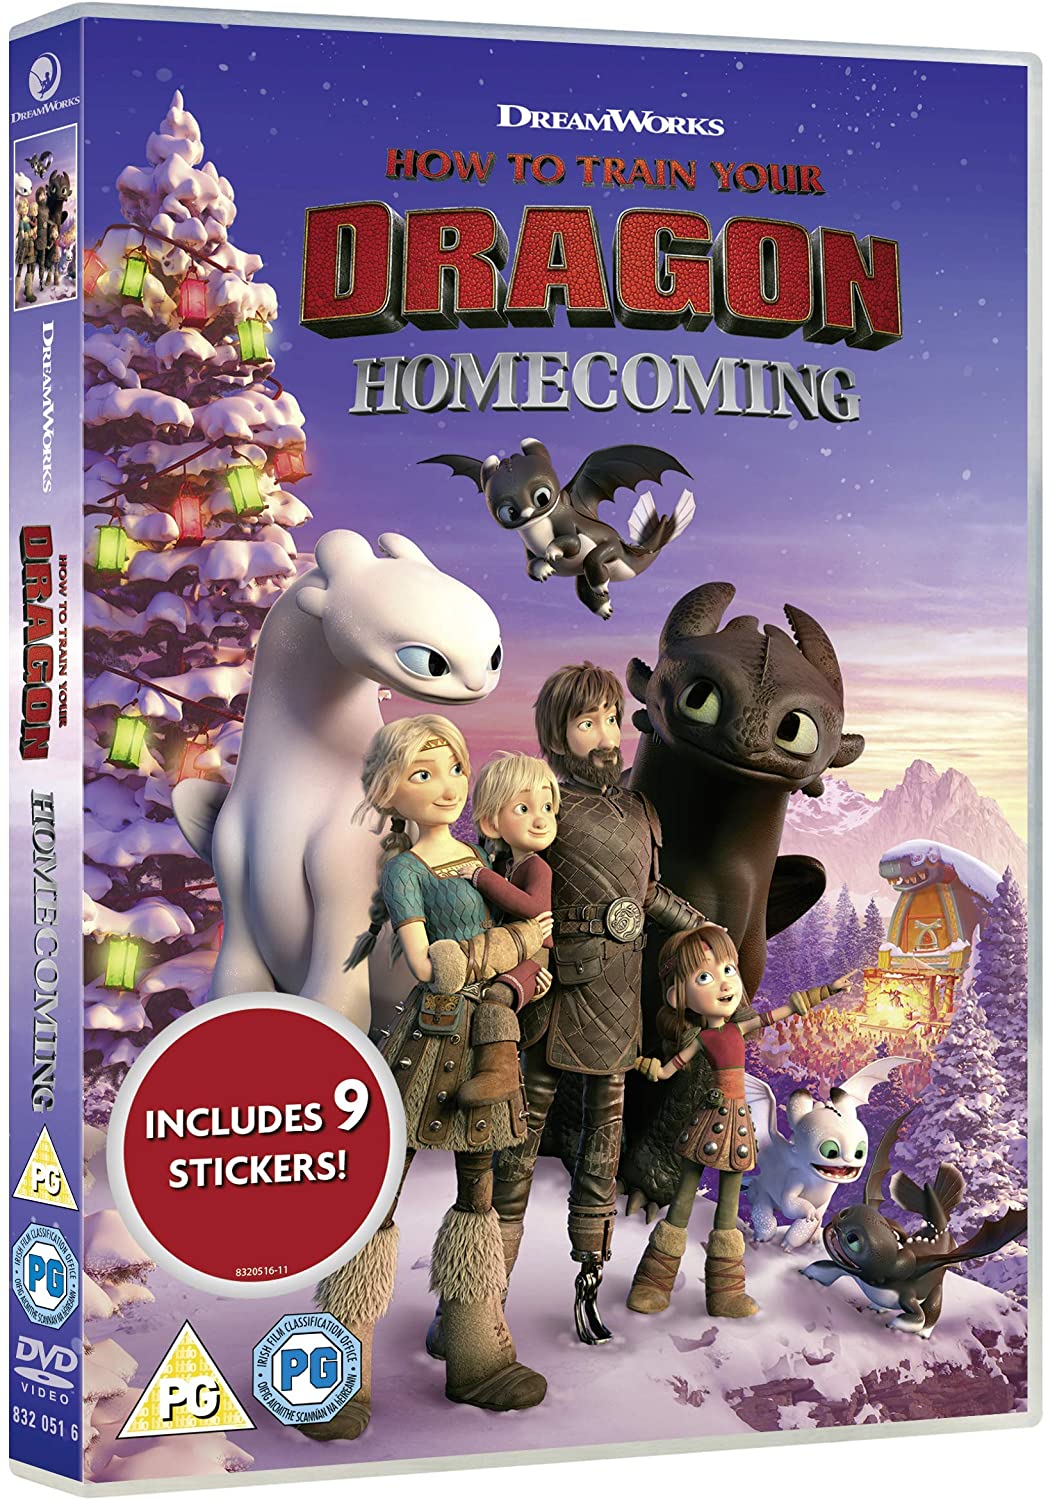 How To Train Your Dragon: Homecoming (Dreamworks) (DVD)